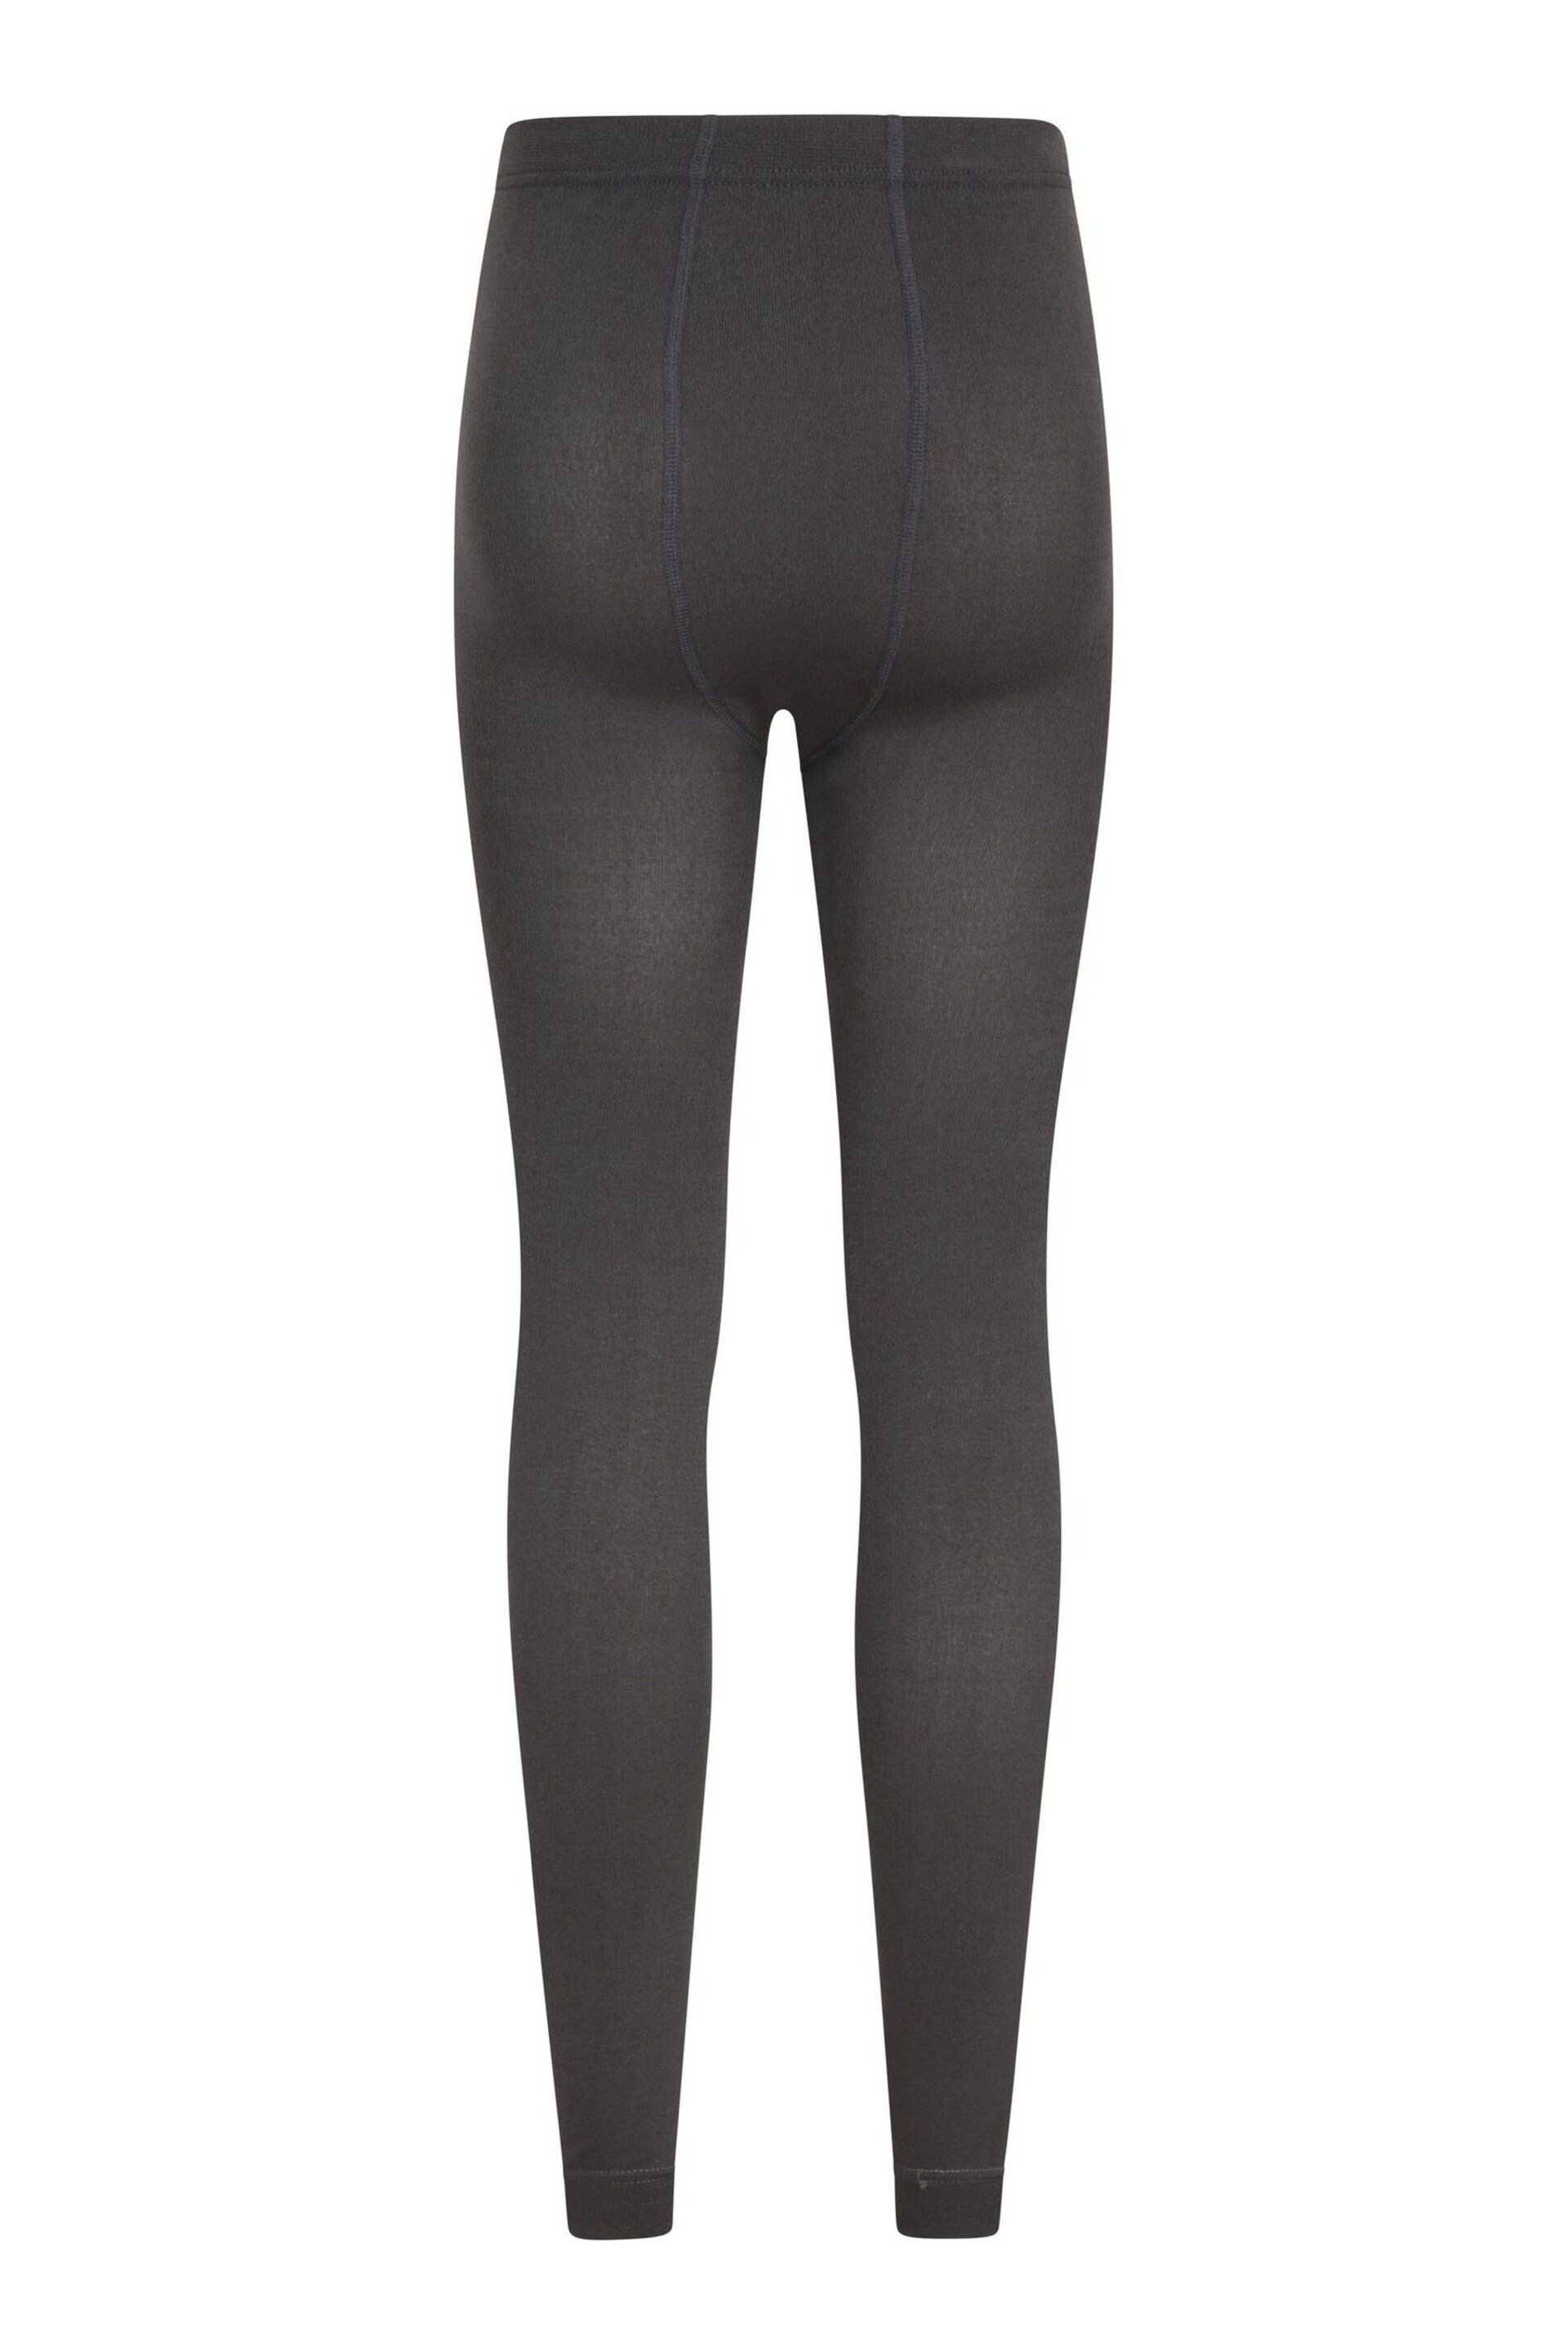 Mountain Warehouse Grey Womens Fluffy Fleece Lined Thermal Leggings - Image 2 of 5